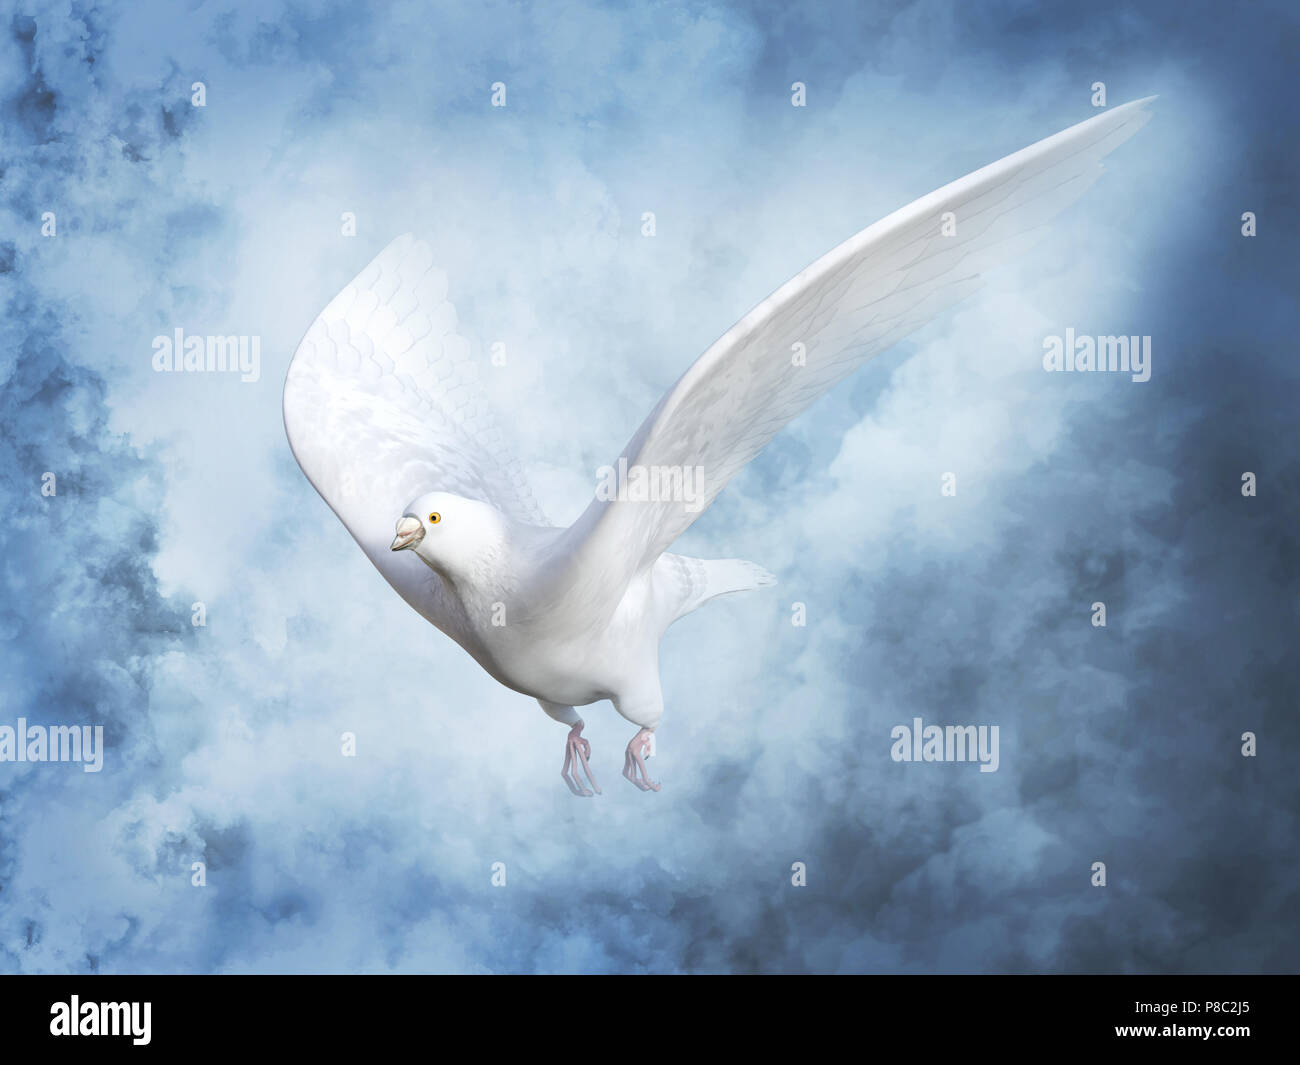 3D rendering of a white peace dove or pigeon flying in heaven with clouds around it. Stock Photo